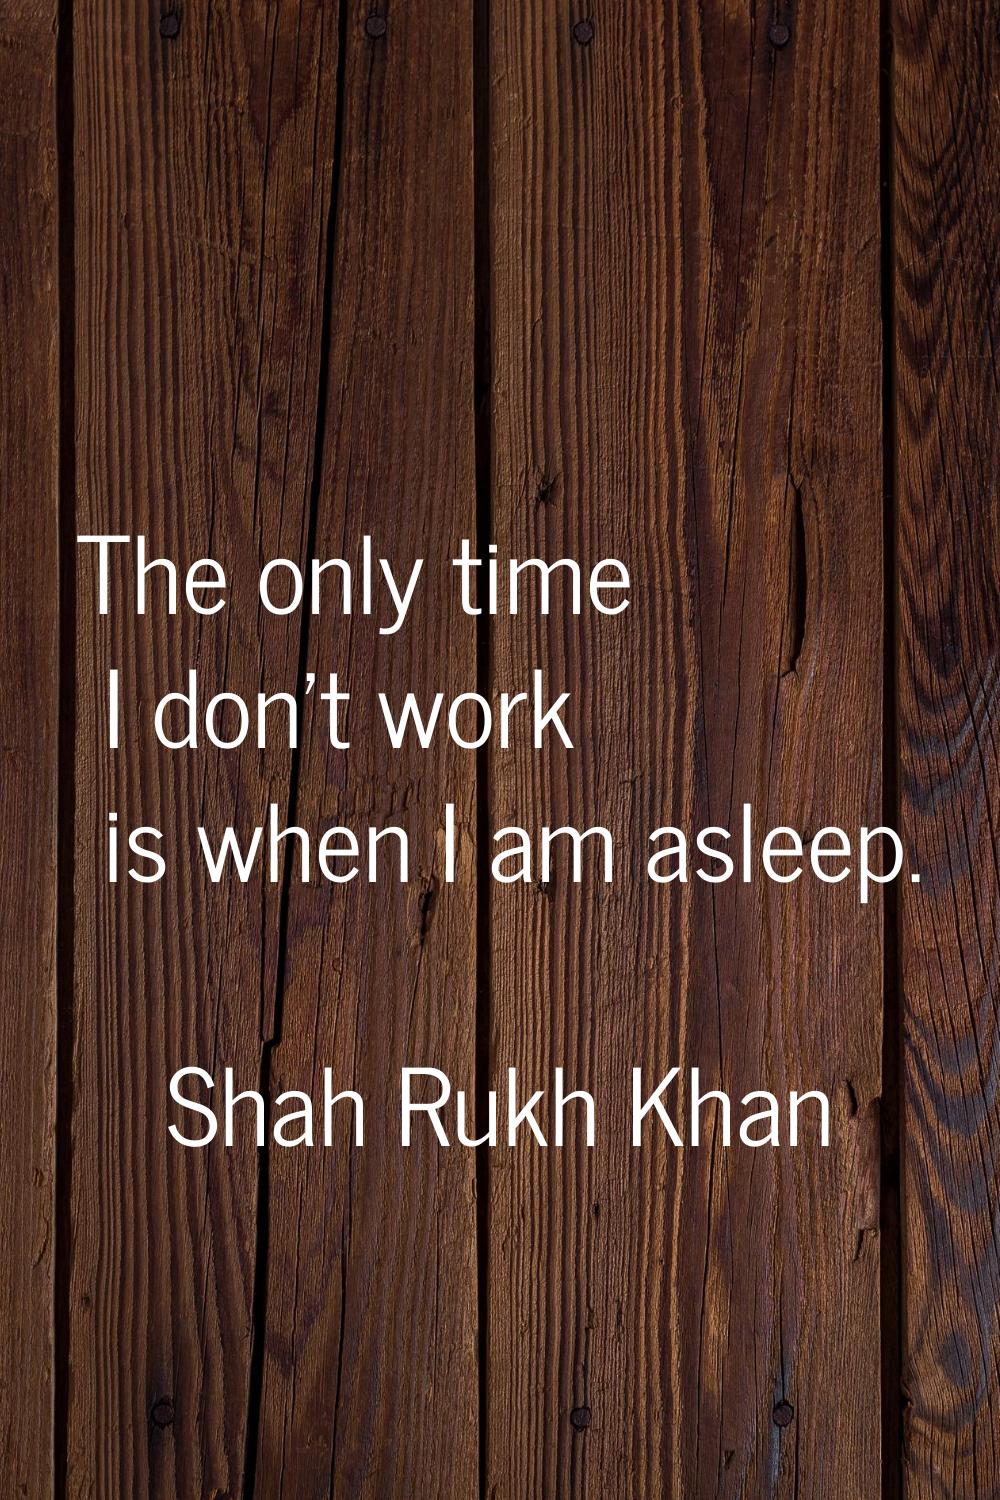 The only time I don't work is when I am asleep.